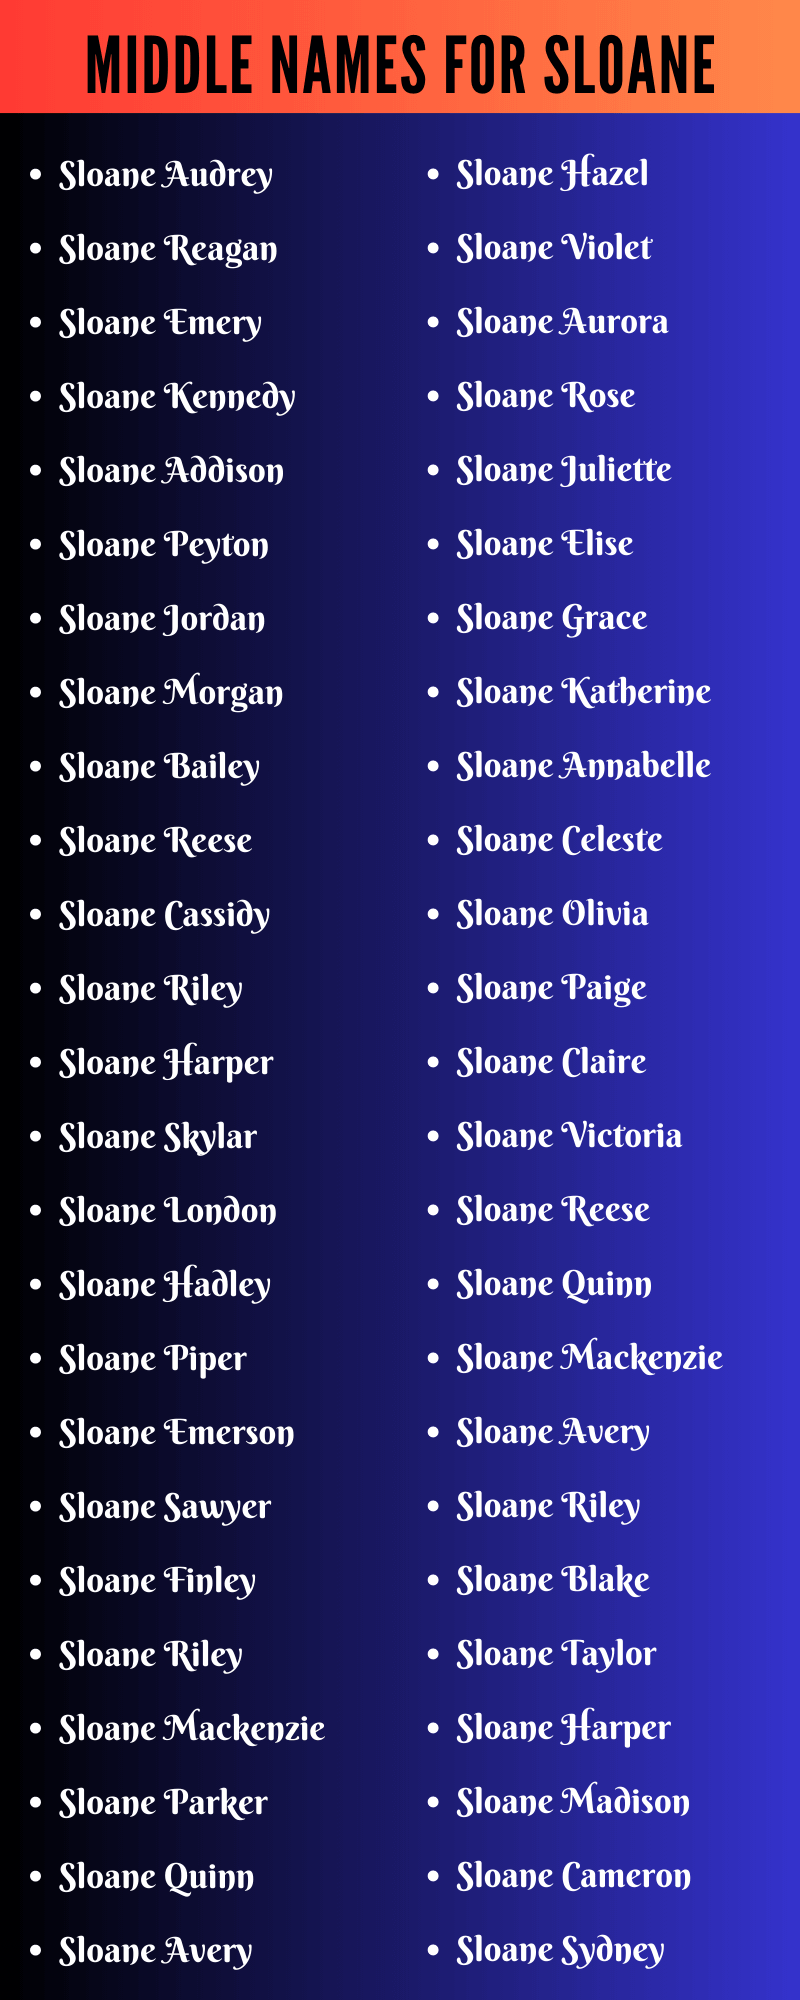 Middle Names For Sloane